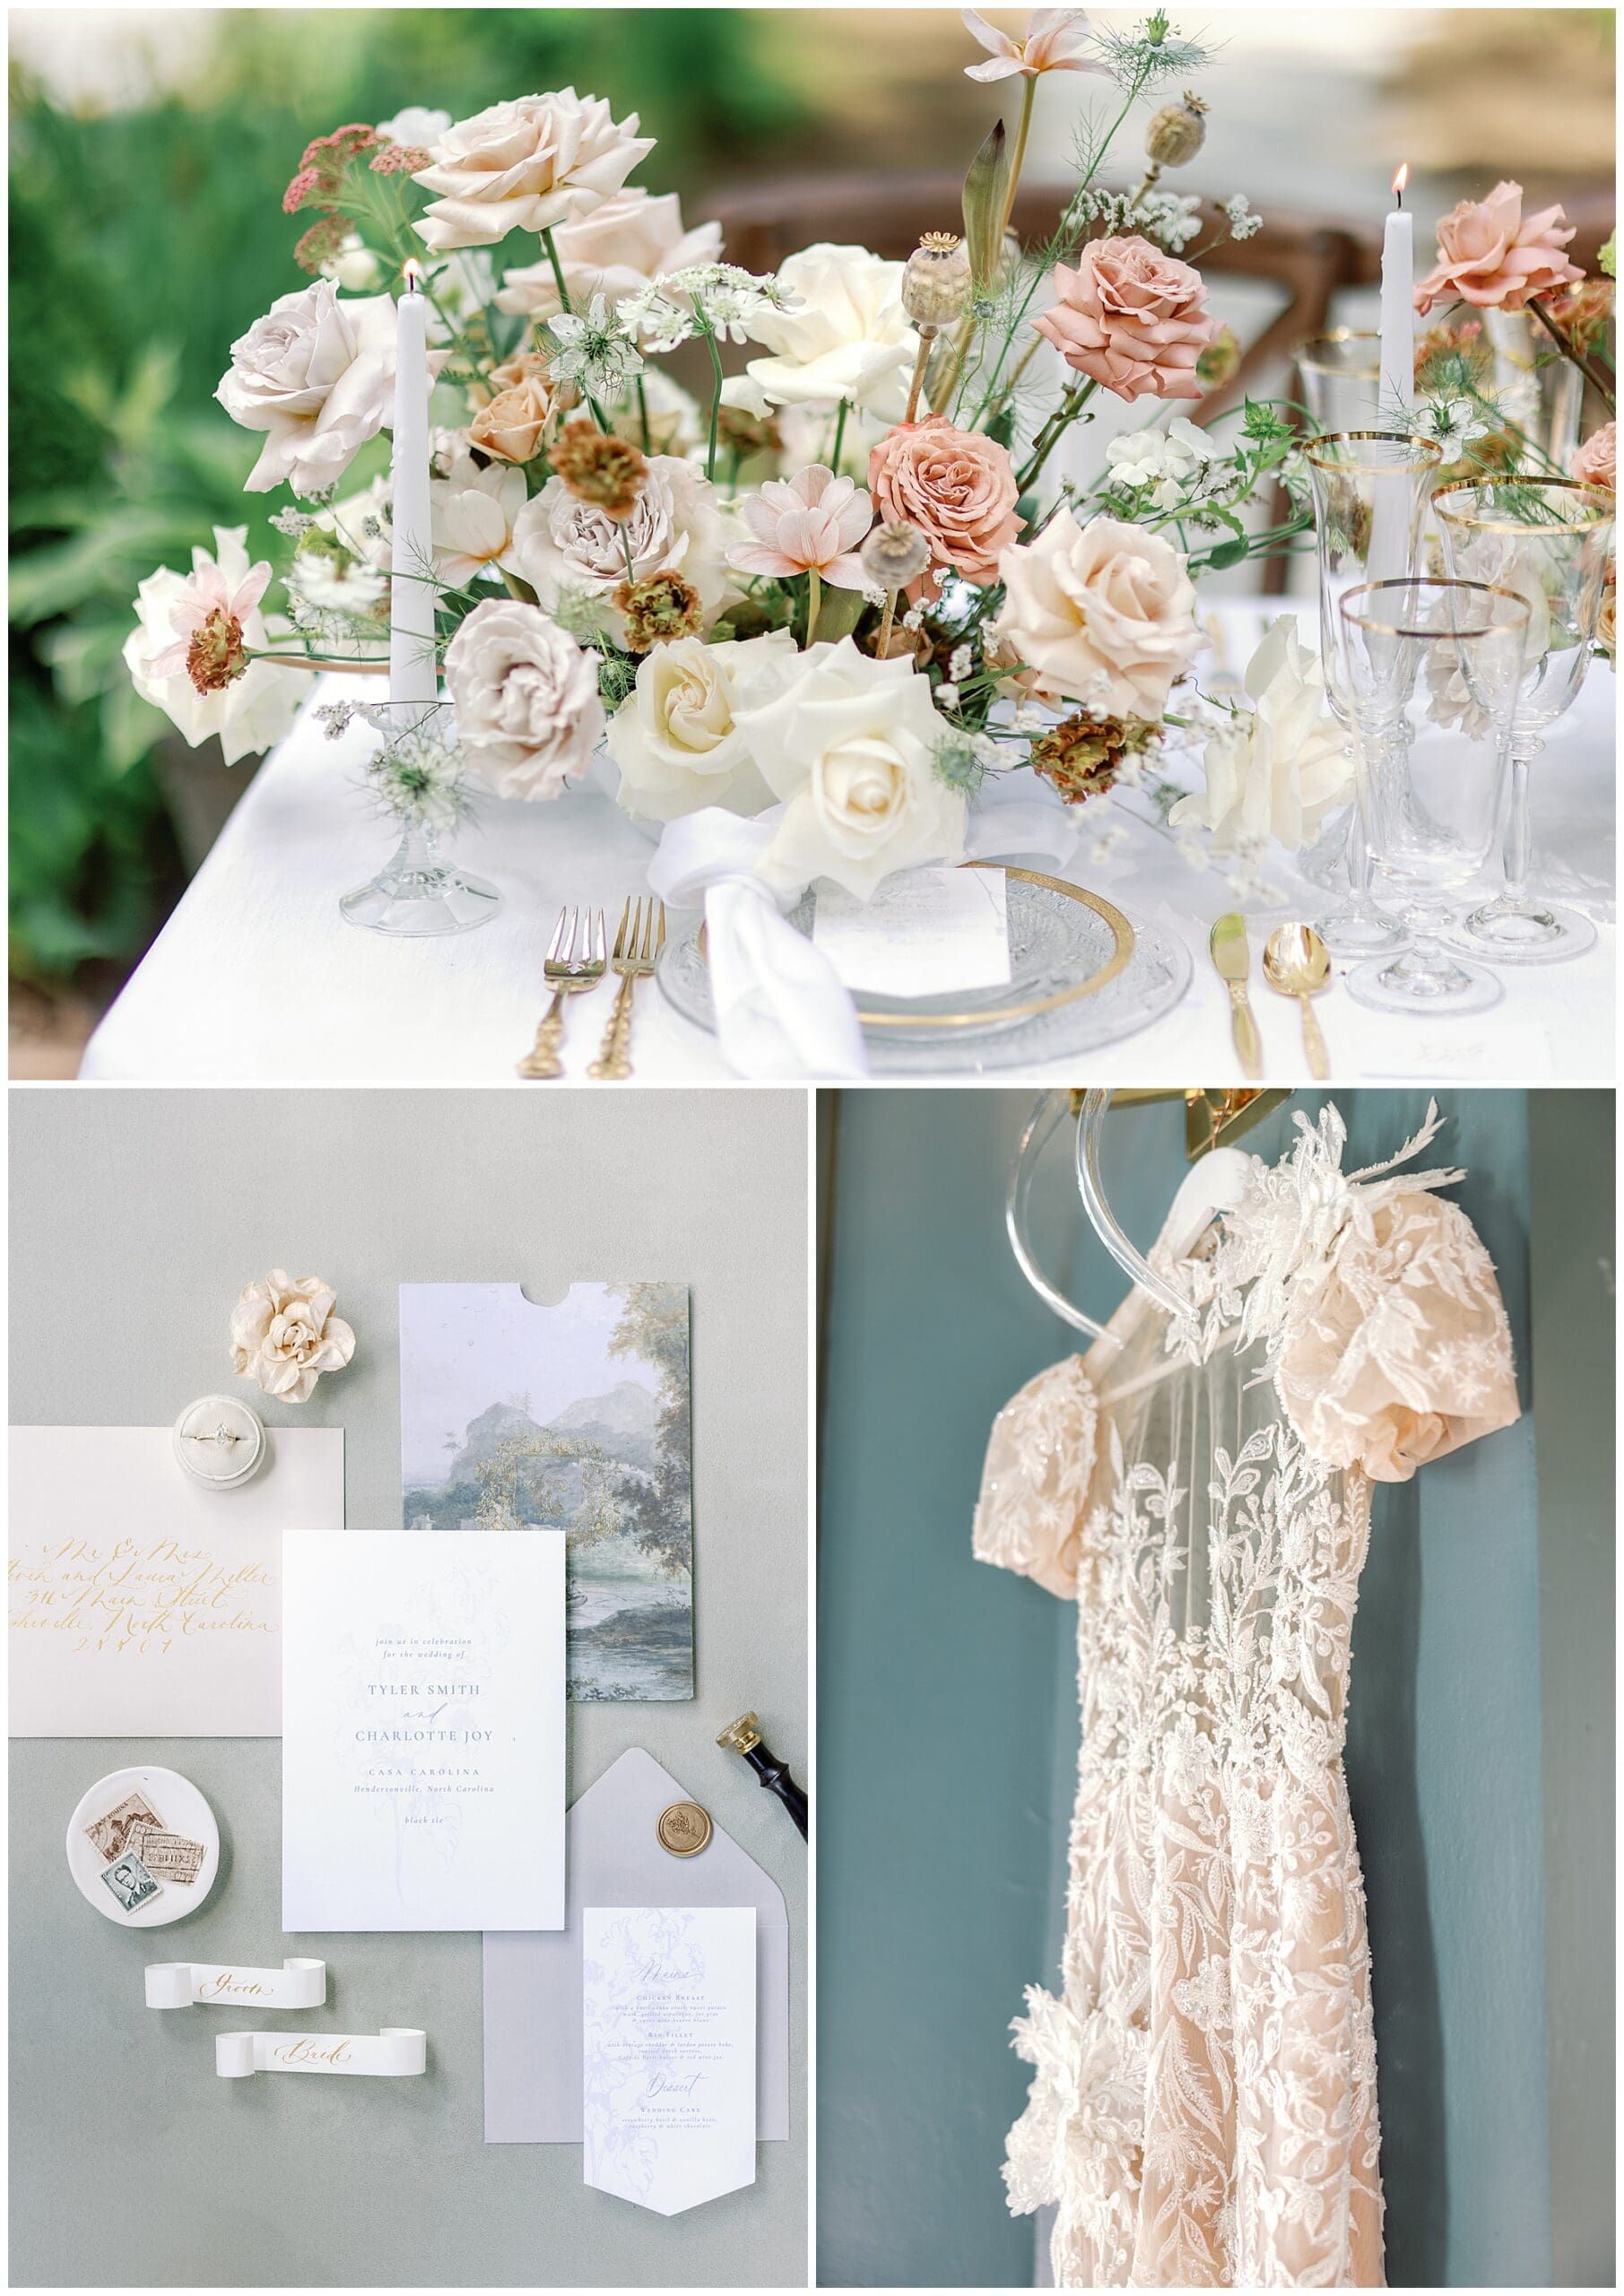 A collage of photos of a wedding with a white dress and flowers.